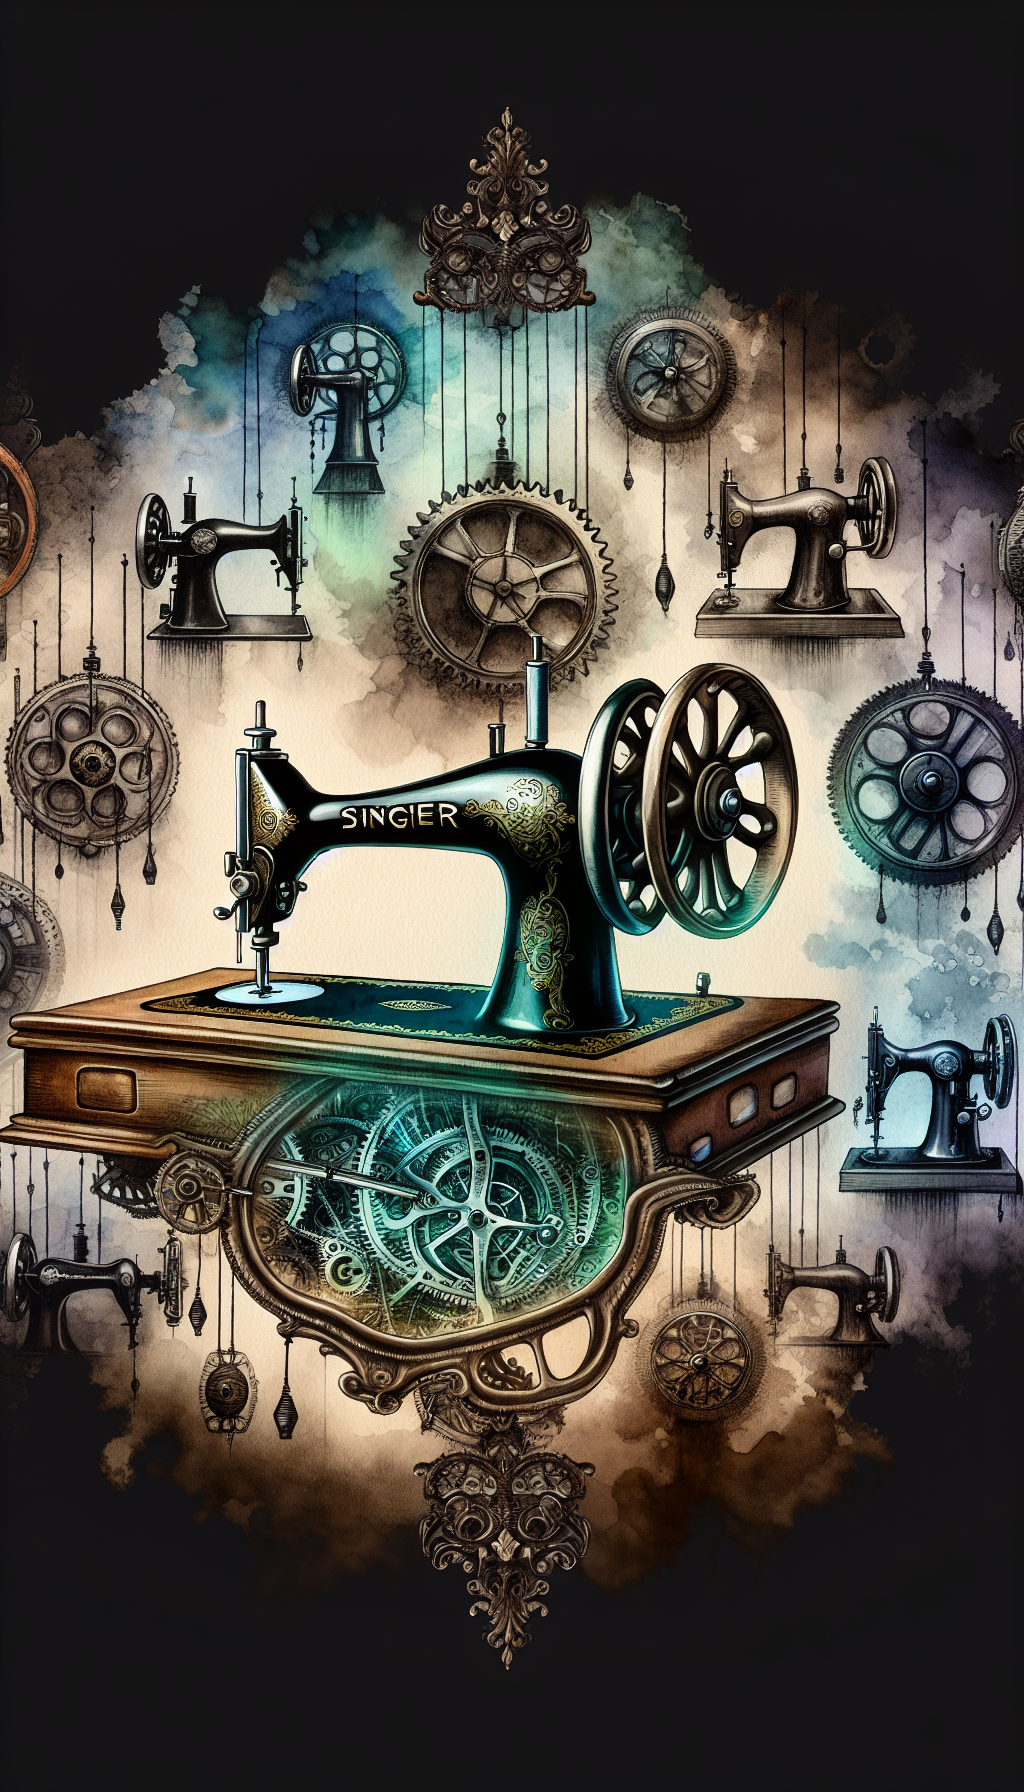 An artistic blend of steampunk and watercolor features an antique Singer sewing machine with a transparent handwheel, showing gears rewinding in time. Behind it, shimmering ghostly images of various coveted Singer models cascade, with price tags hanging from a Victorian-style ornate frame, hinting at their value. The styles create a sense of historical depth and financial appreciation.